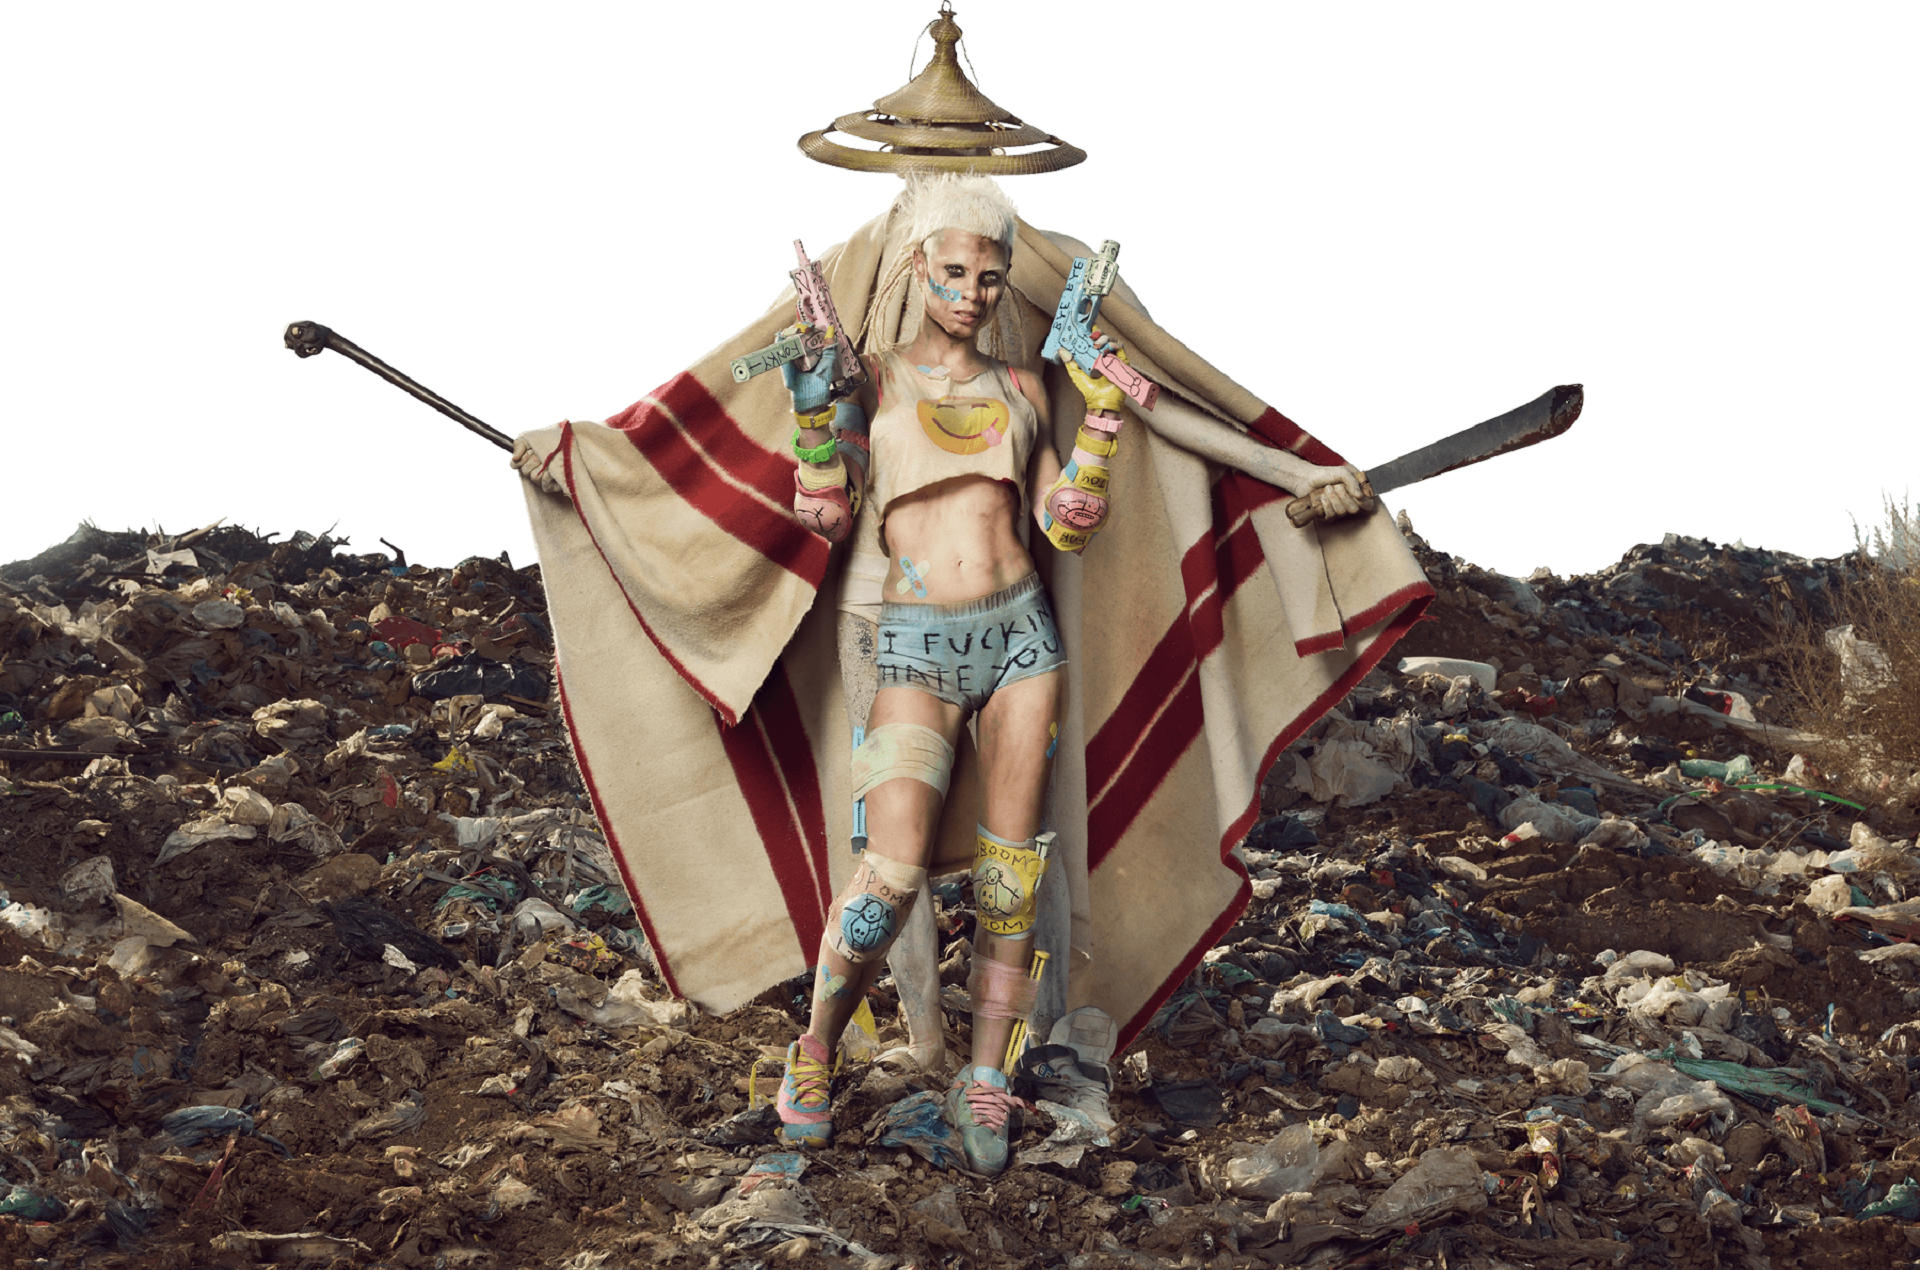 Die Antwoord Wallpaper Image Photos Pictures Background